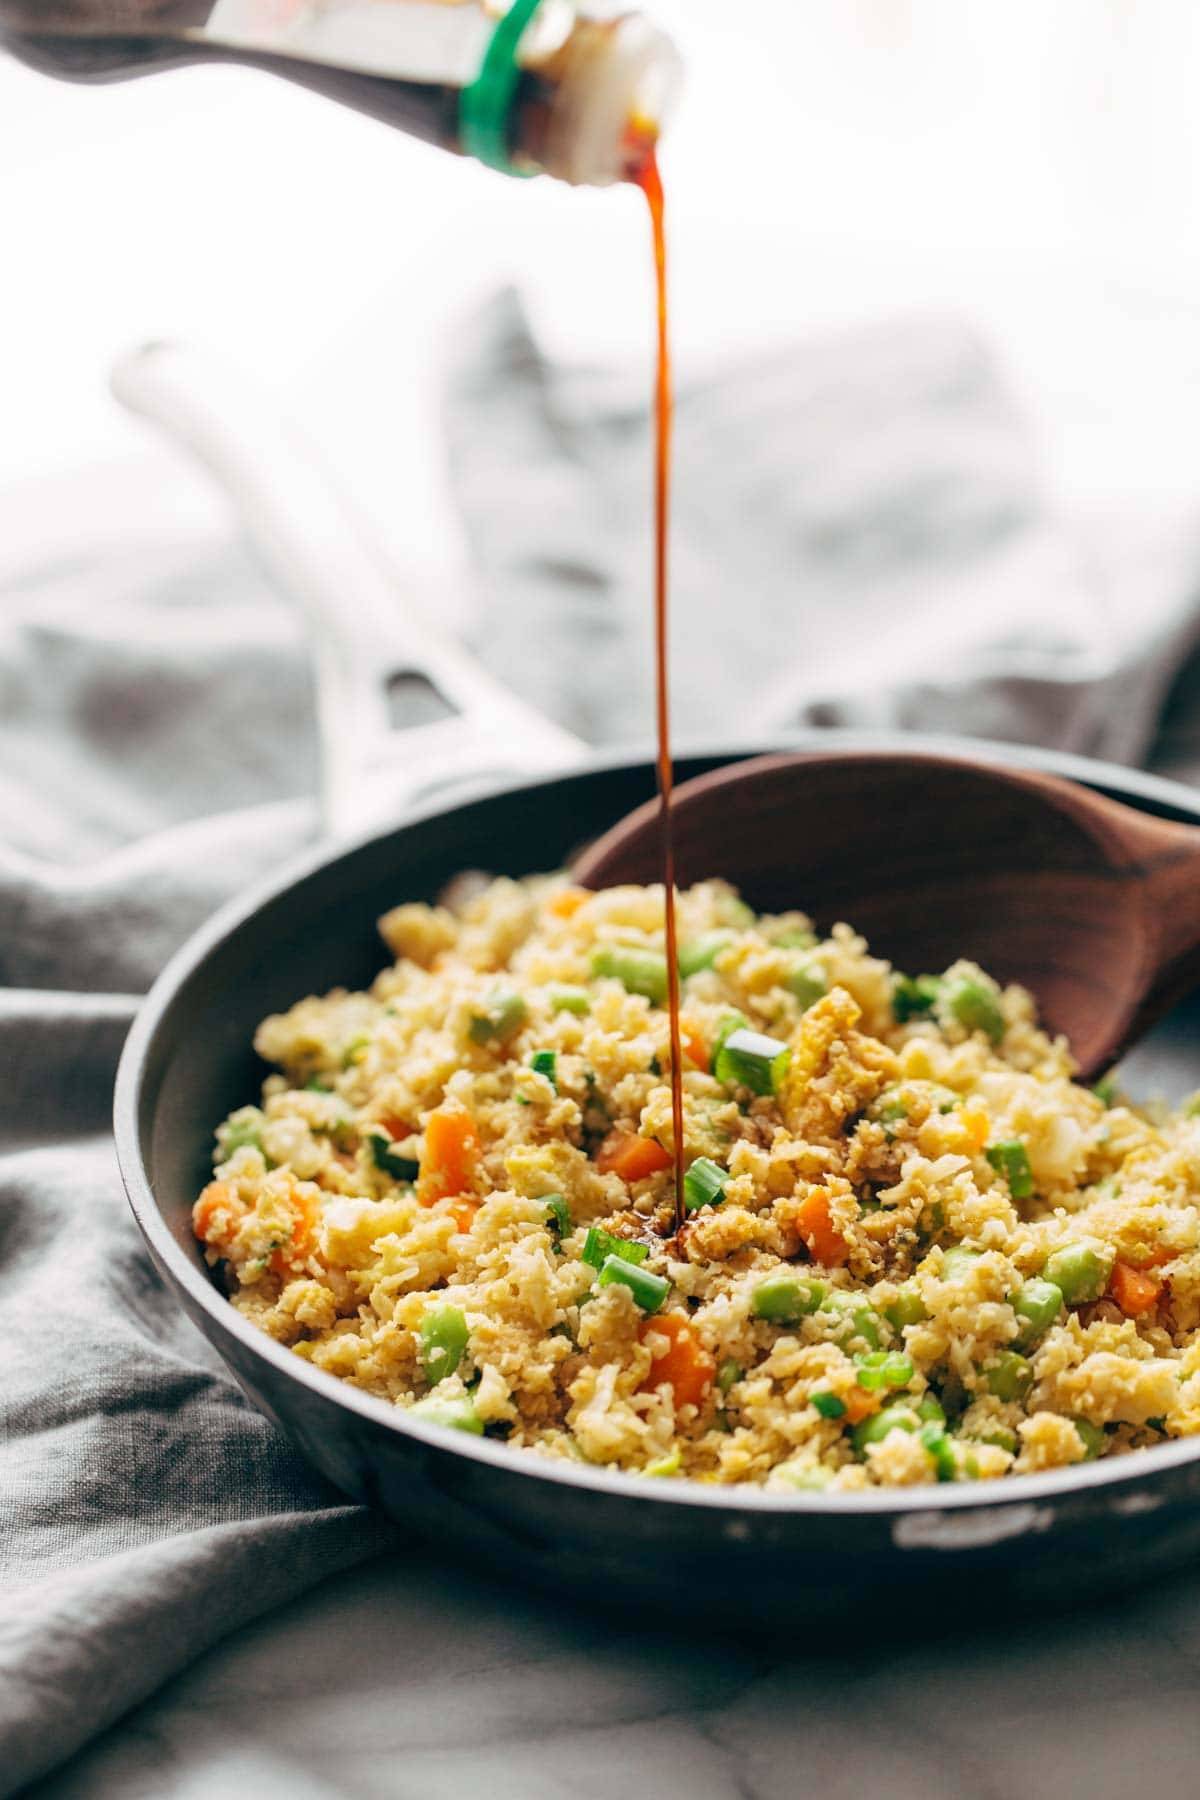 cauliflower fried rice in a bowl with a wooden spoon and a drizzle of soy sauce